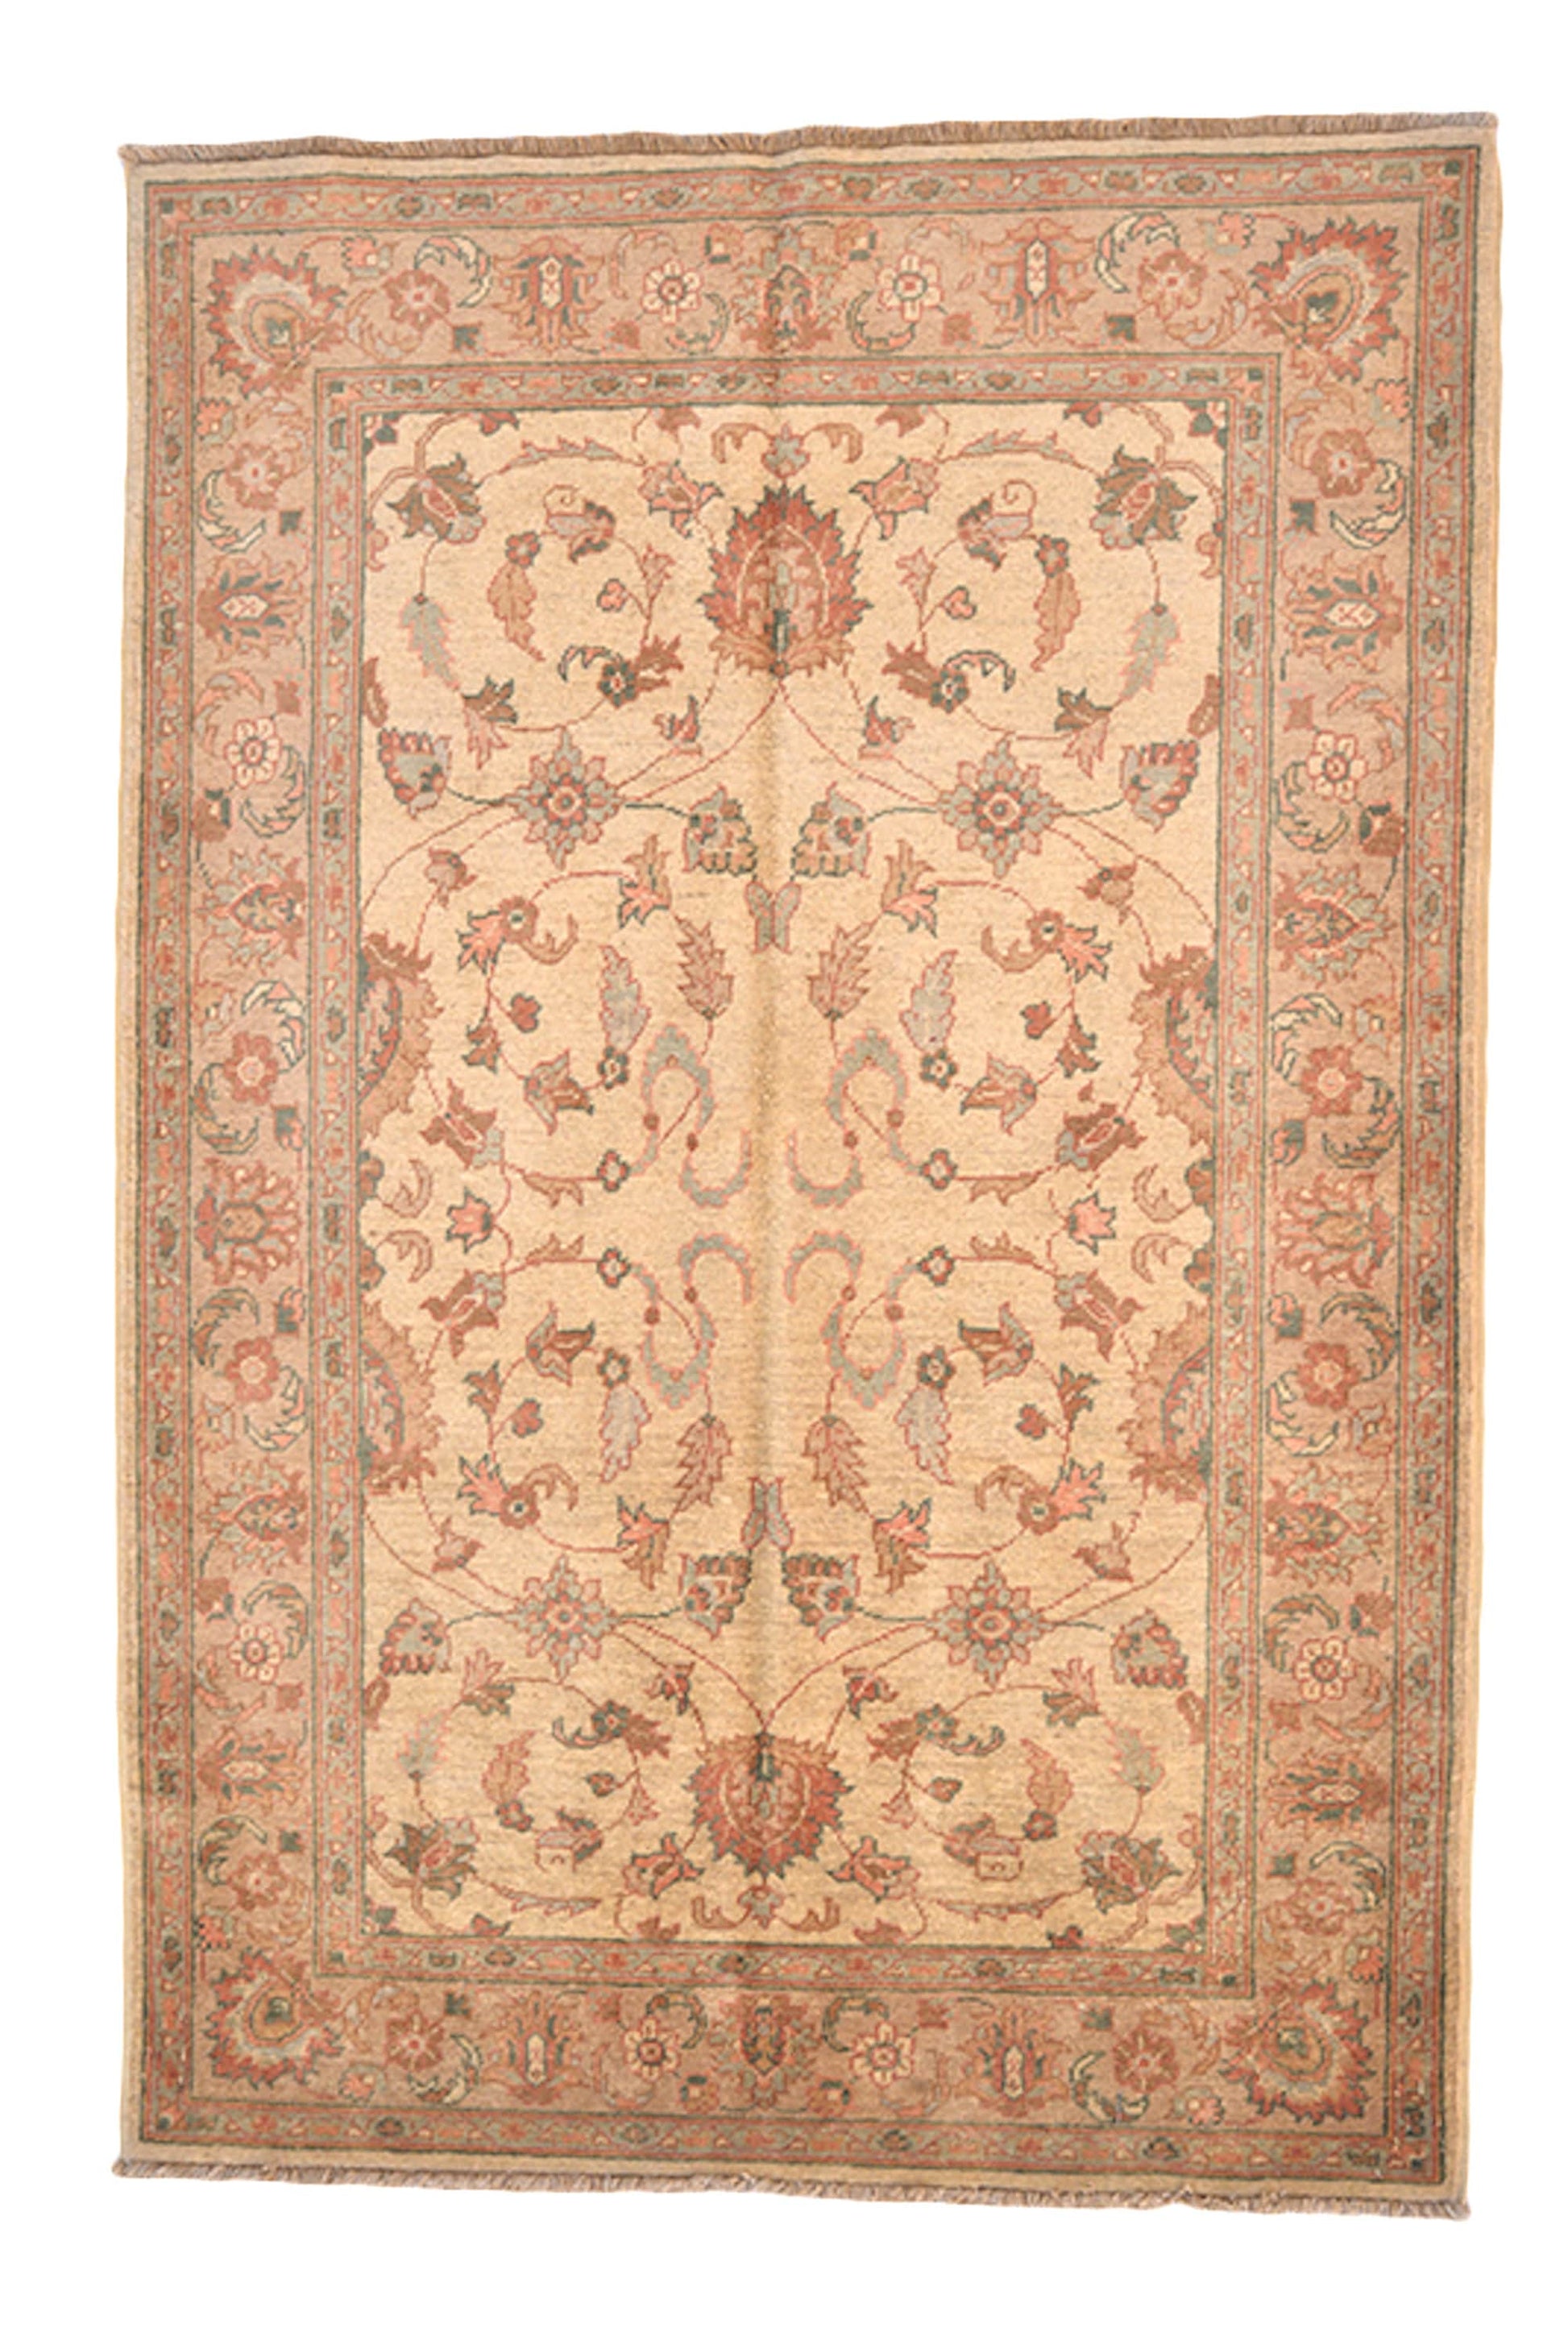 4 x 6 Beige Antique Rug | Farmhouse Style Entryway or Kitchen Area Rug with Floral Border and Light Colored Designs | Wool Handmade